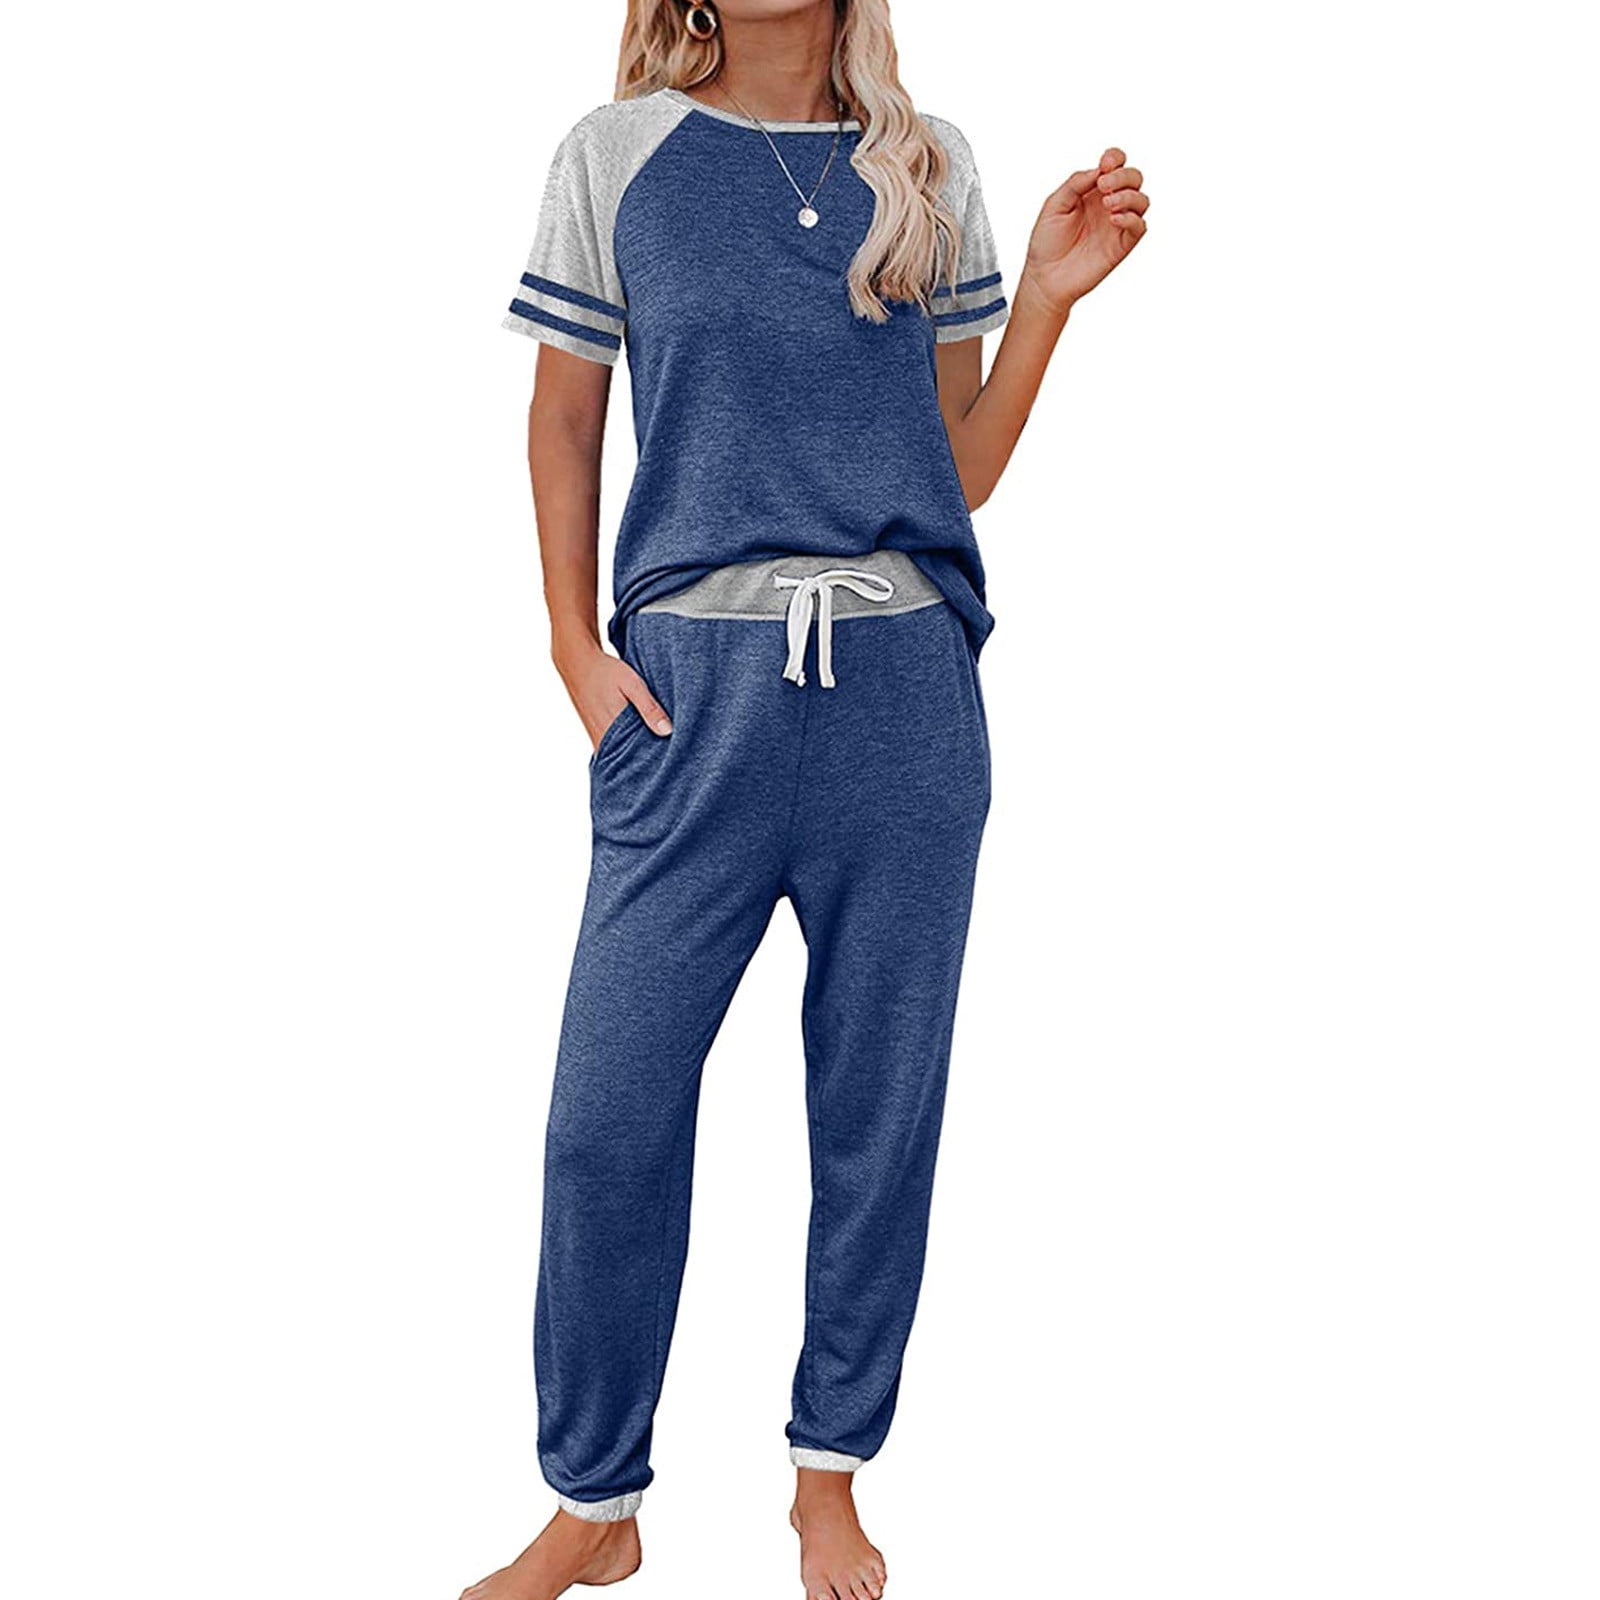 lystmrge Work Out Outfits Women Clothes Sets Top And Pants Petite Suit  Women's Patchwork Short Sleeve O-neck Pullover Leisure Tops + Pants Set 